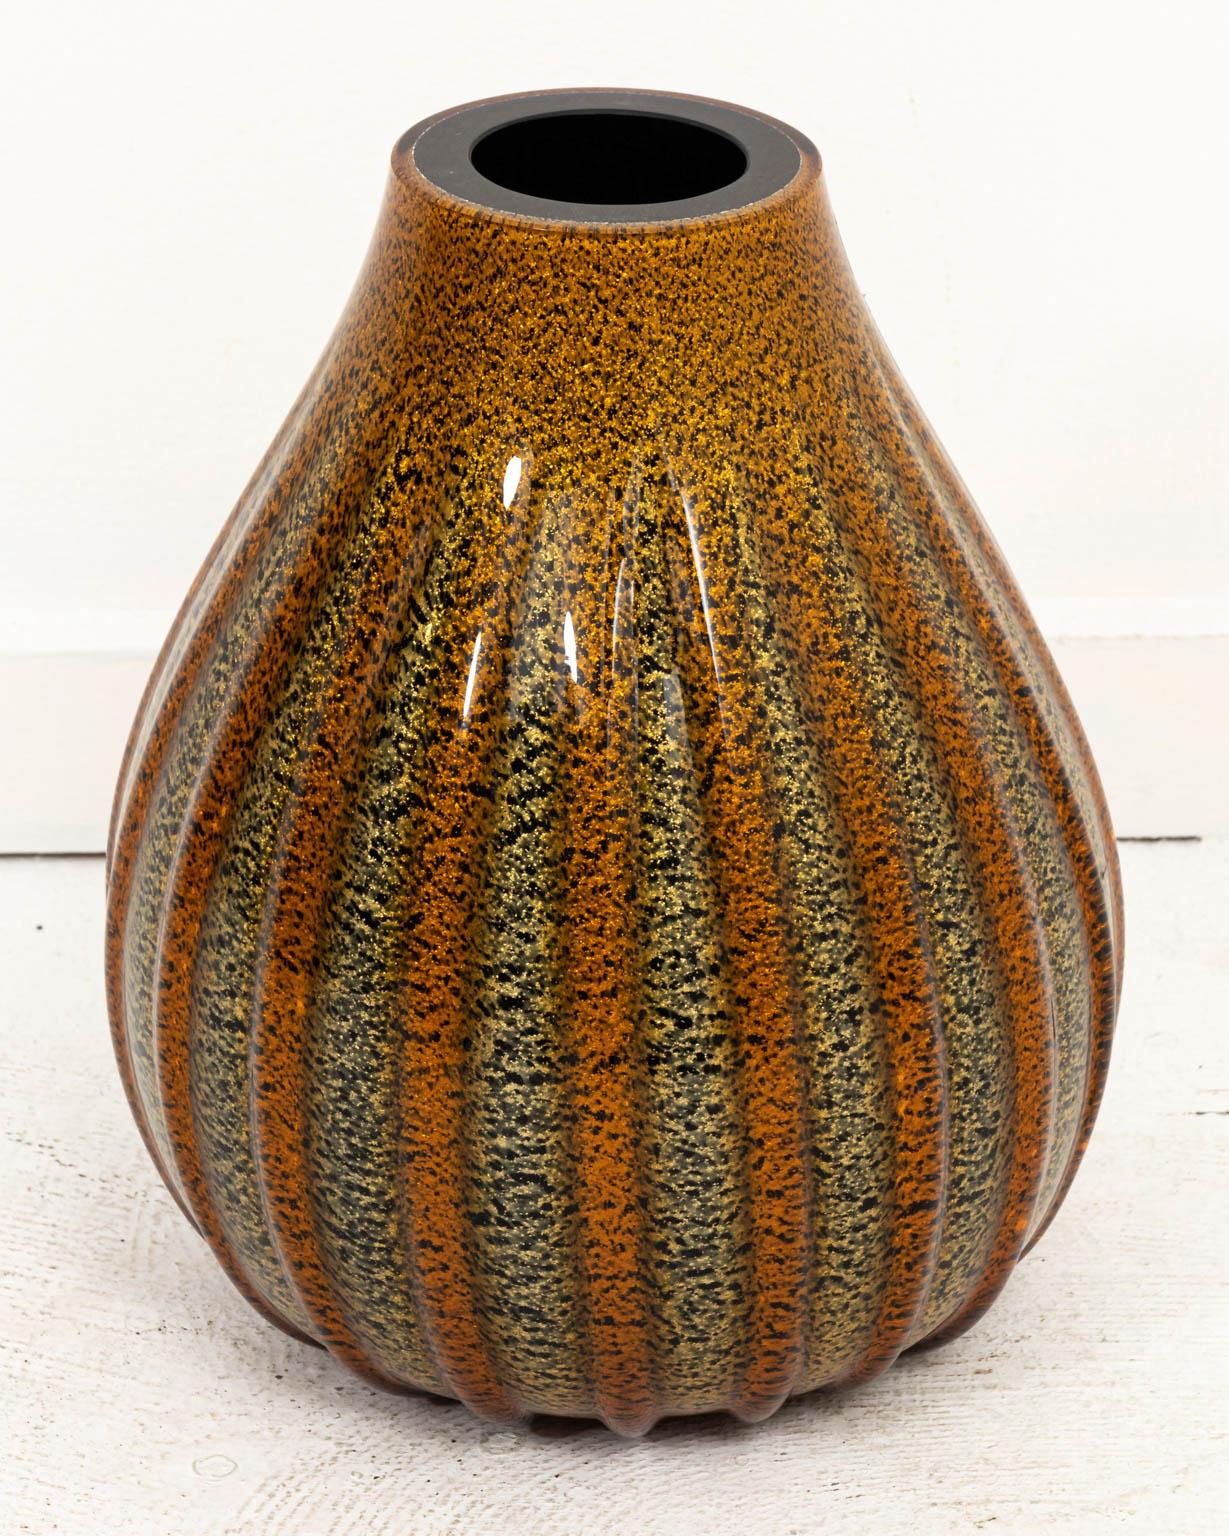 Striped Murano glass vase with alternating bands of orange and dark brown with gold inclusions, circa mid-20th century. There is also a dark brown interior. Retains 